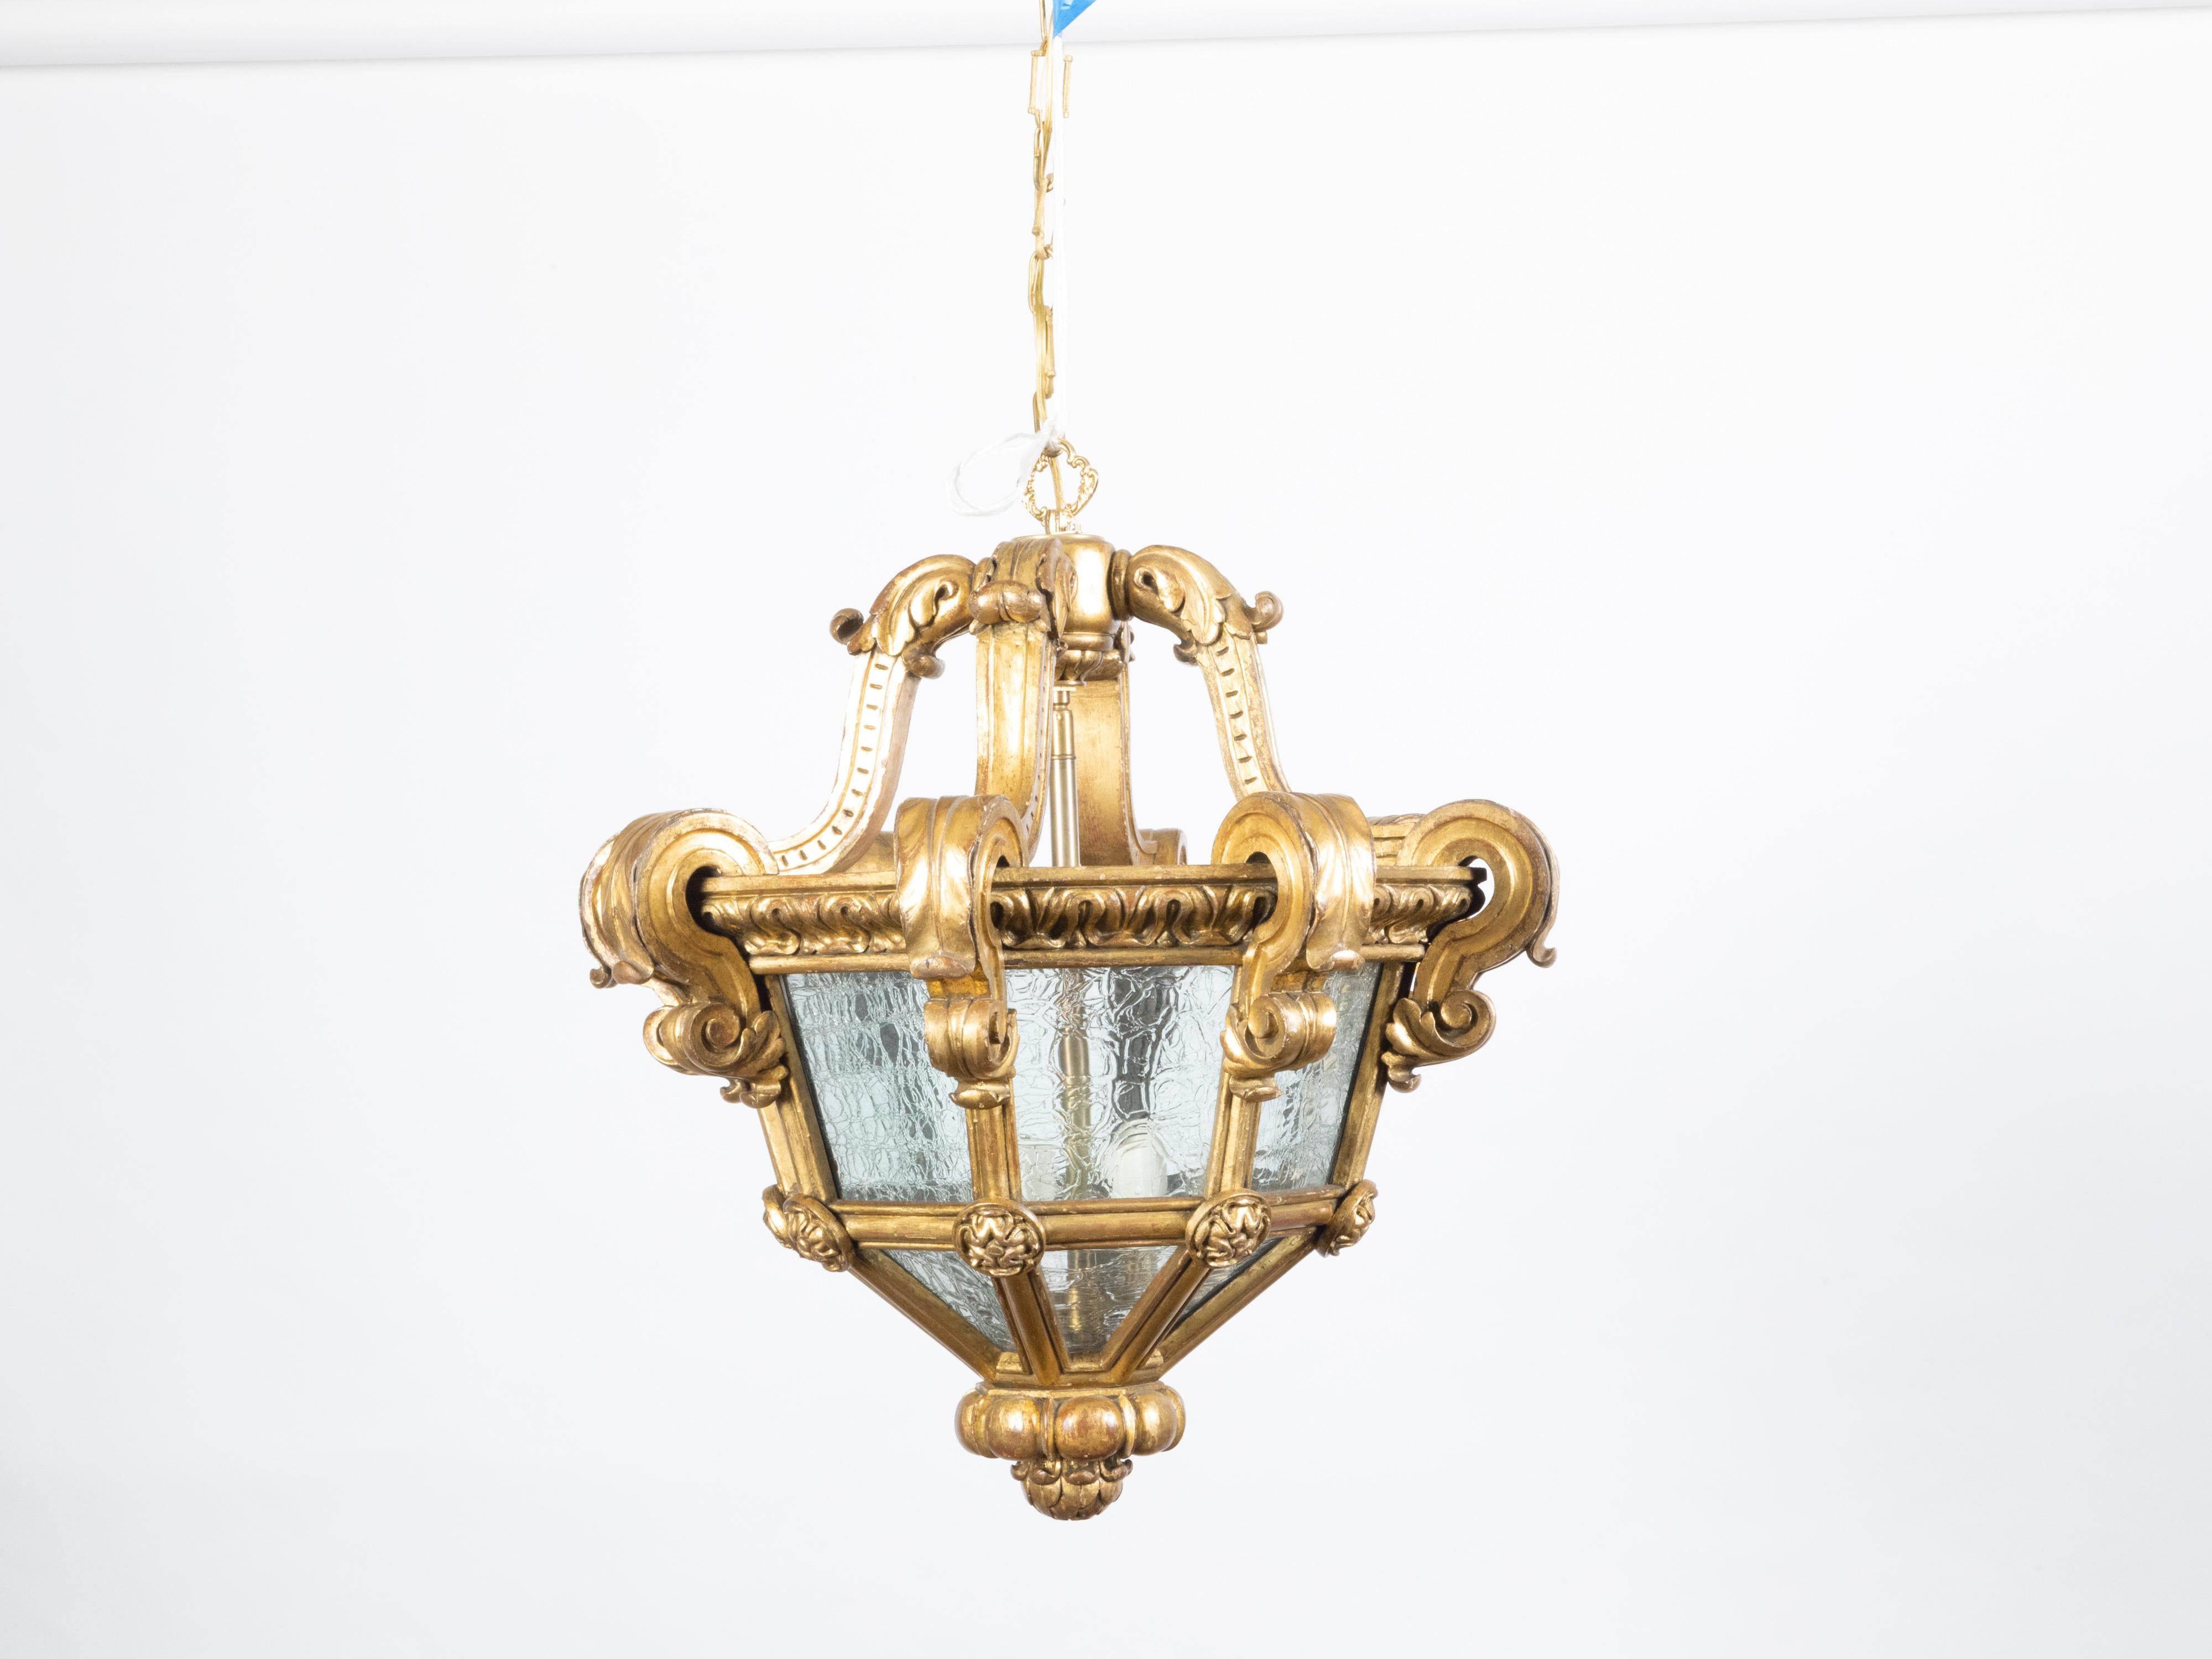 French Baroque Style Giltwood Lantern with Carved Volutes and Textured Glass In Good Condition For Sale In Atlanta, GA